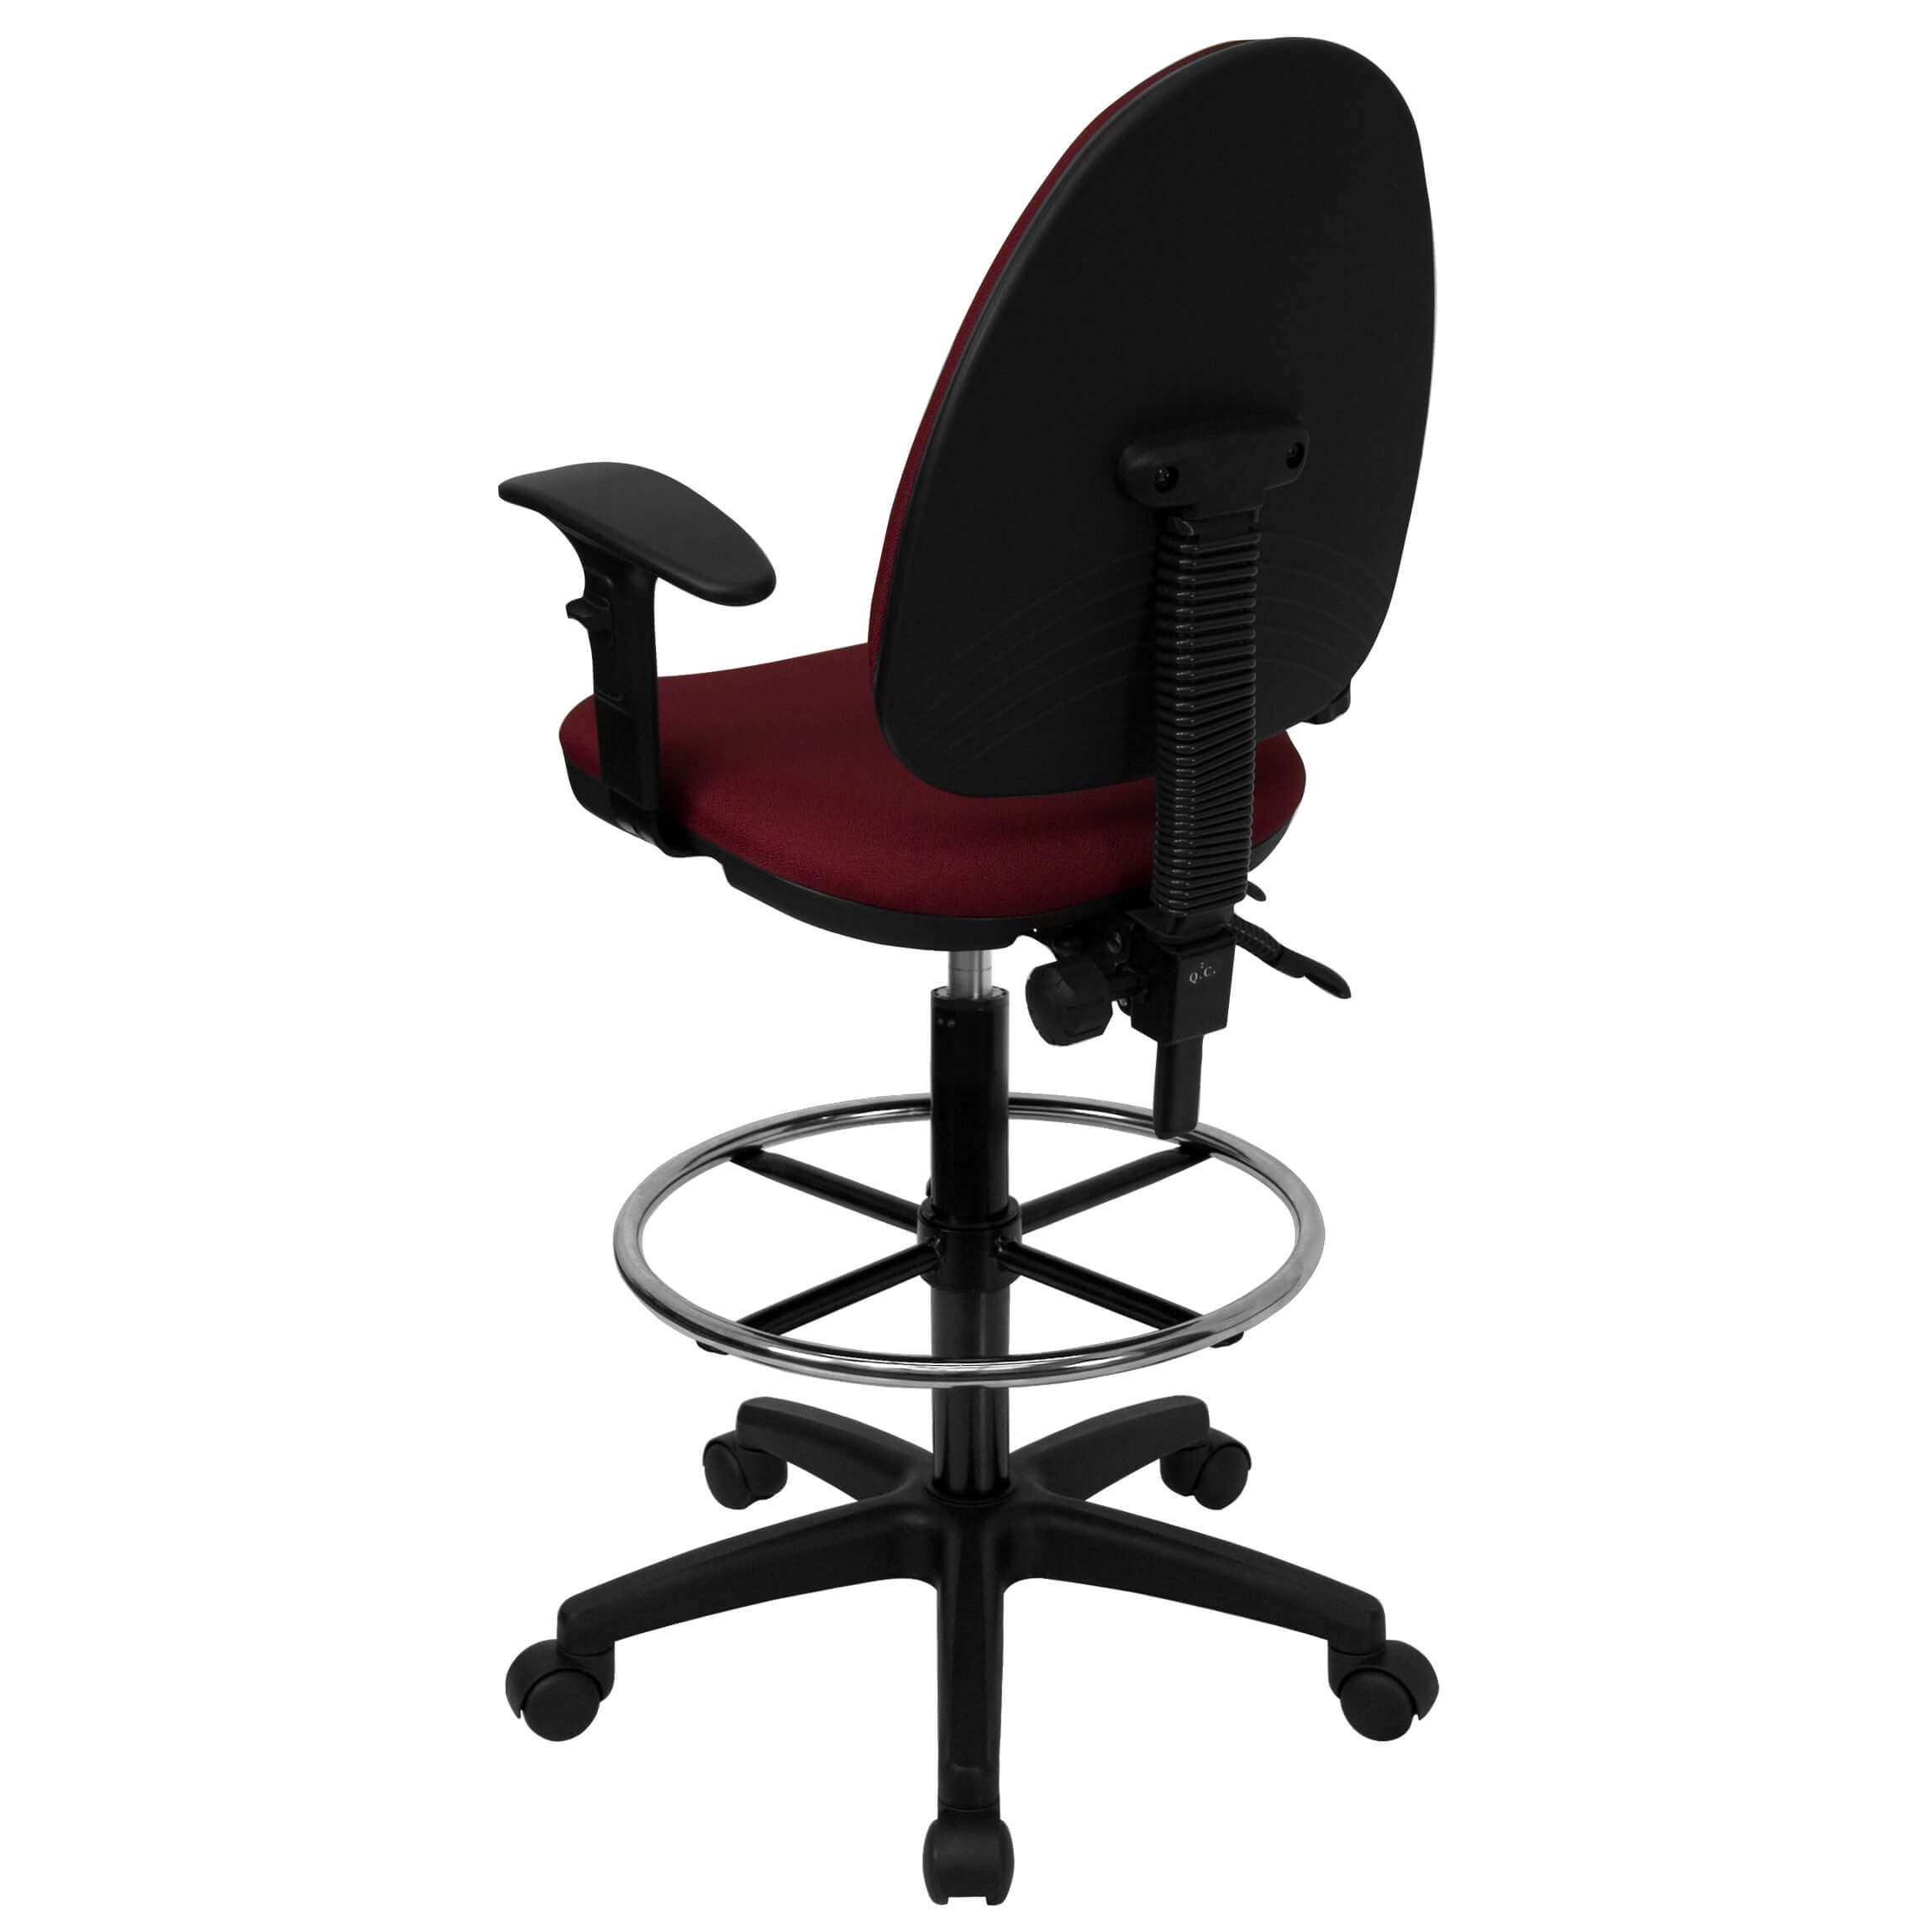 Adjustable drafting chair rear view